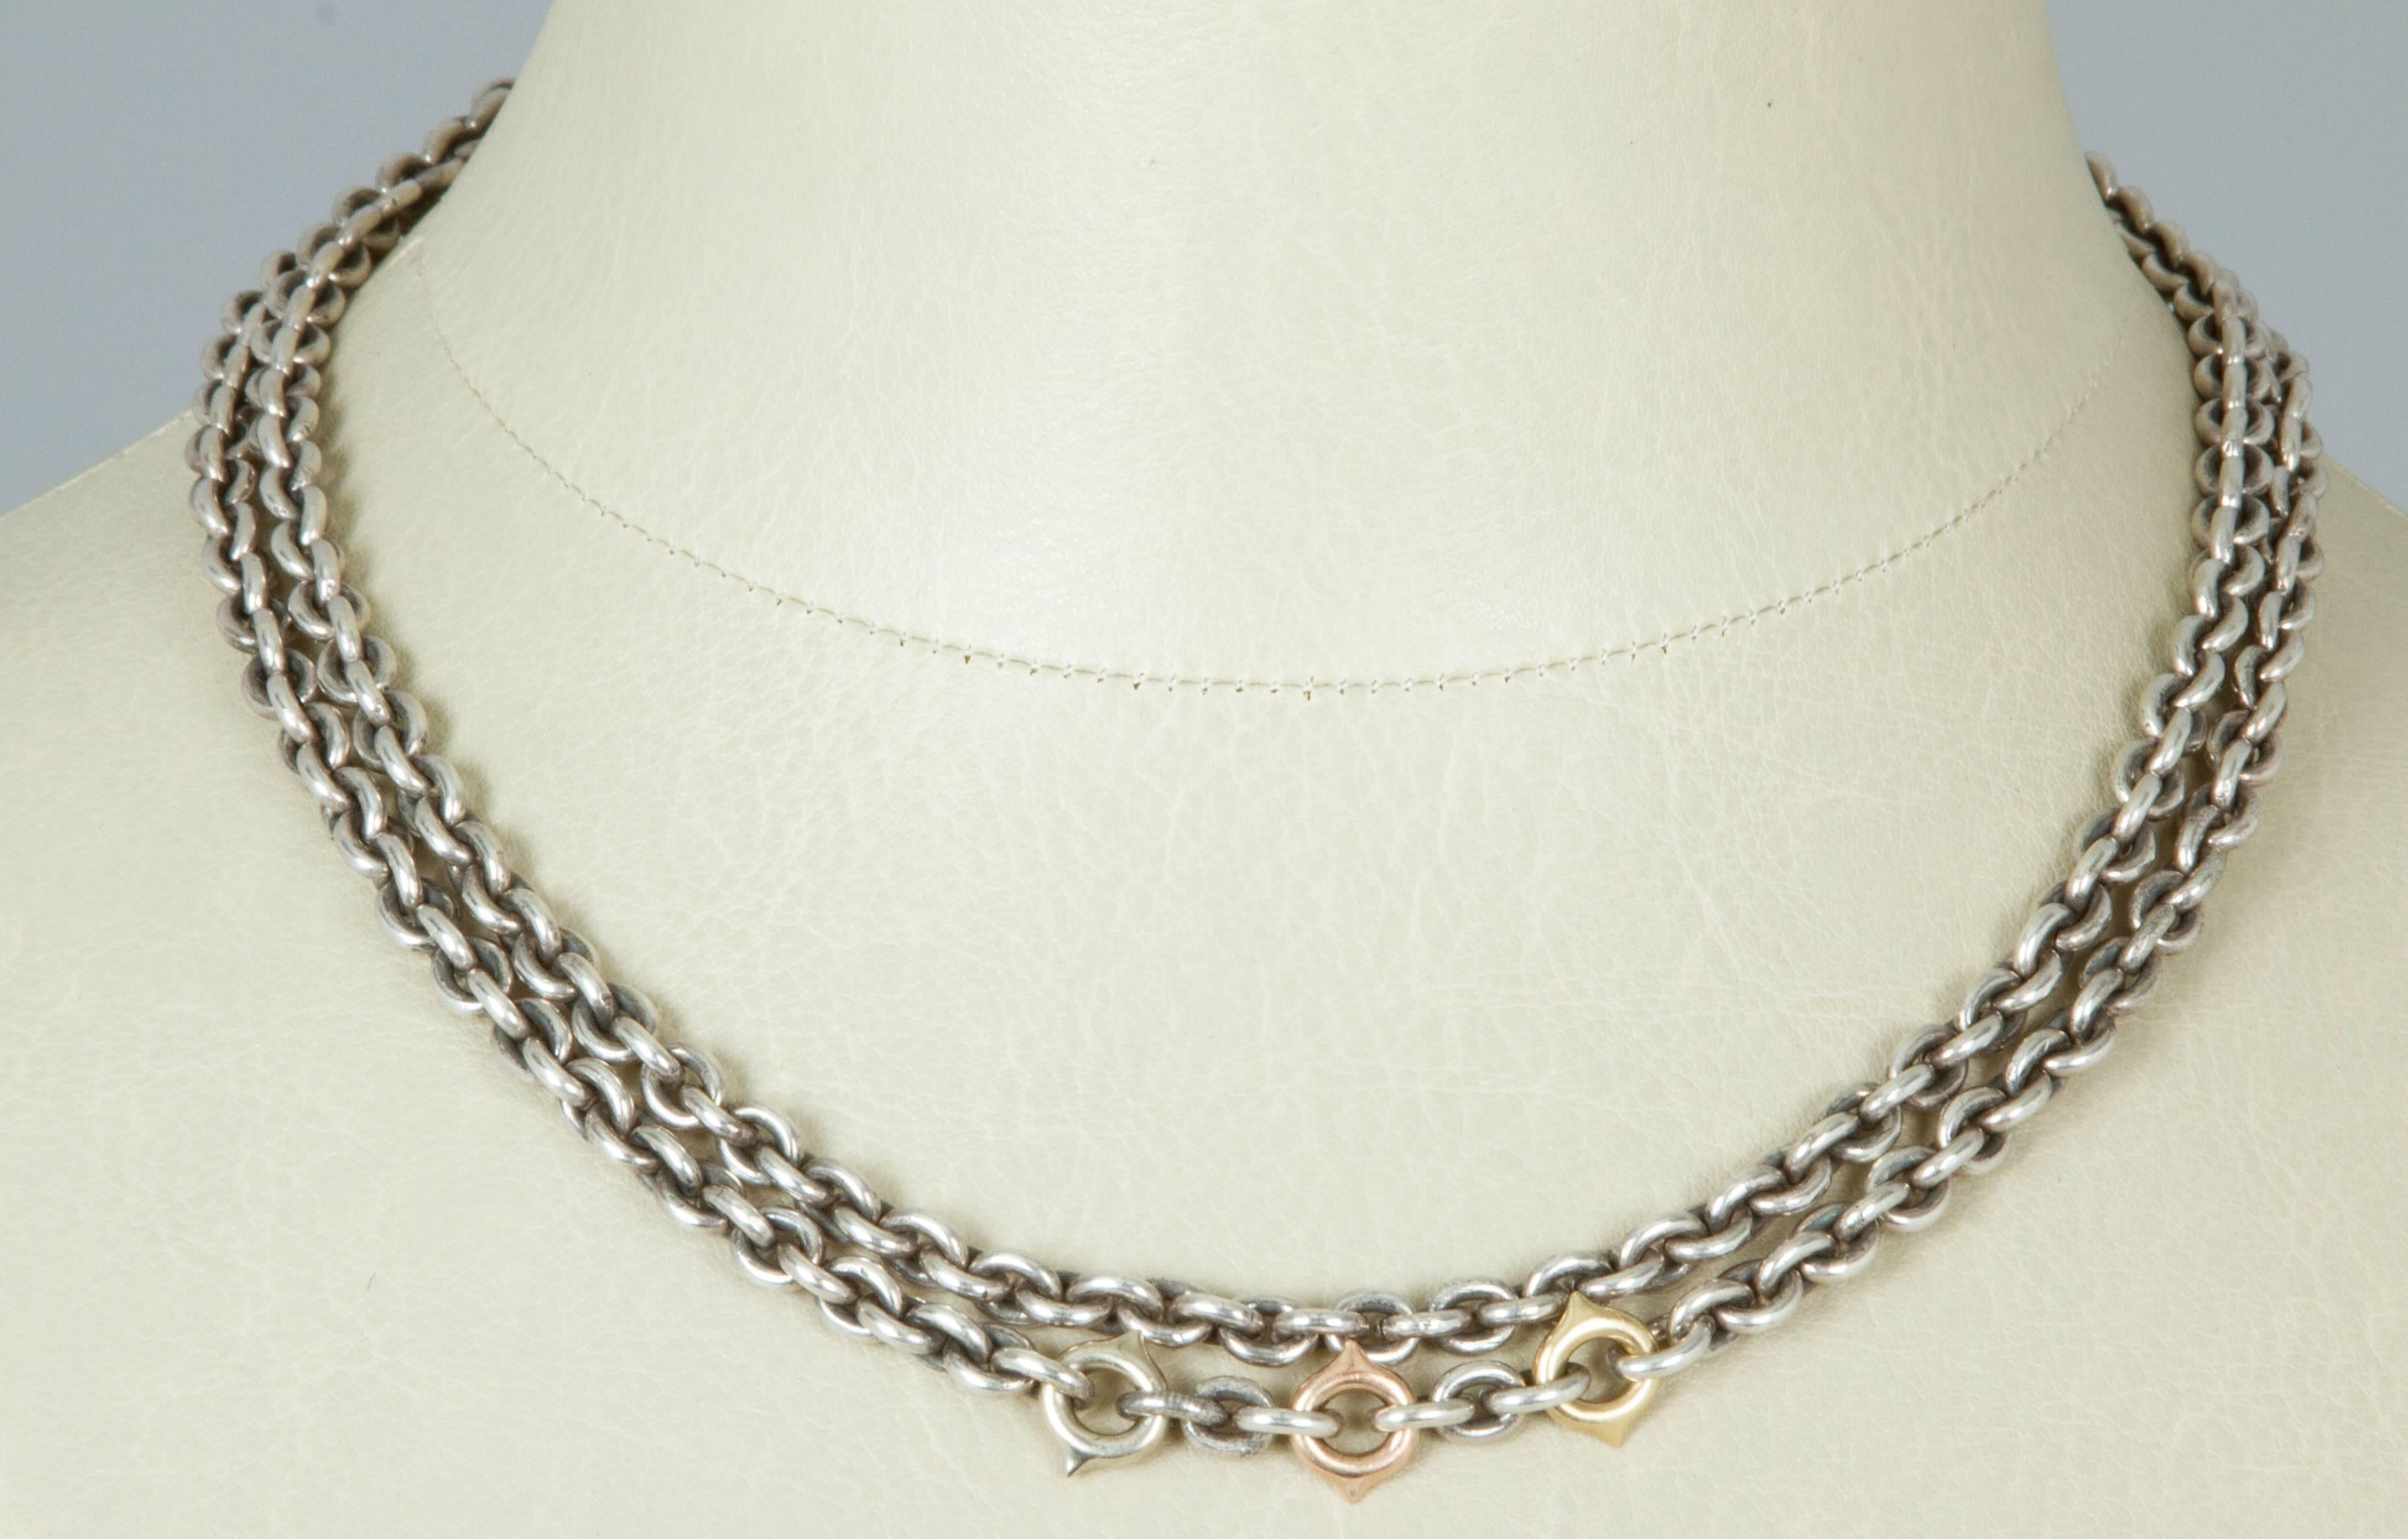 Women's Pedro Boregaard Sterling Chain Necklace with White and Yellow Gold Accents